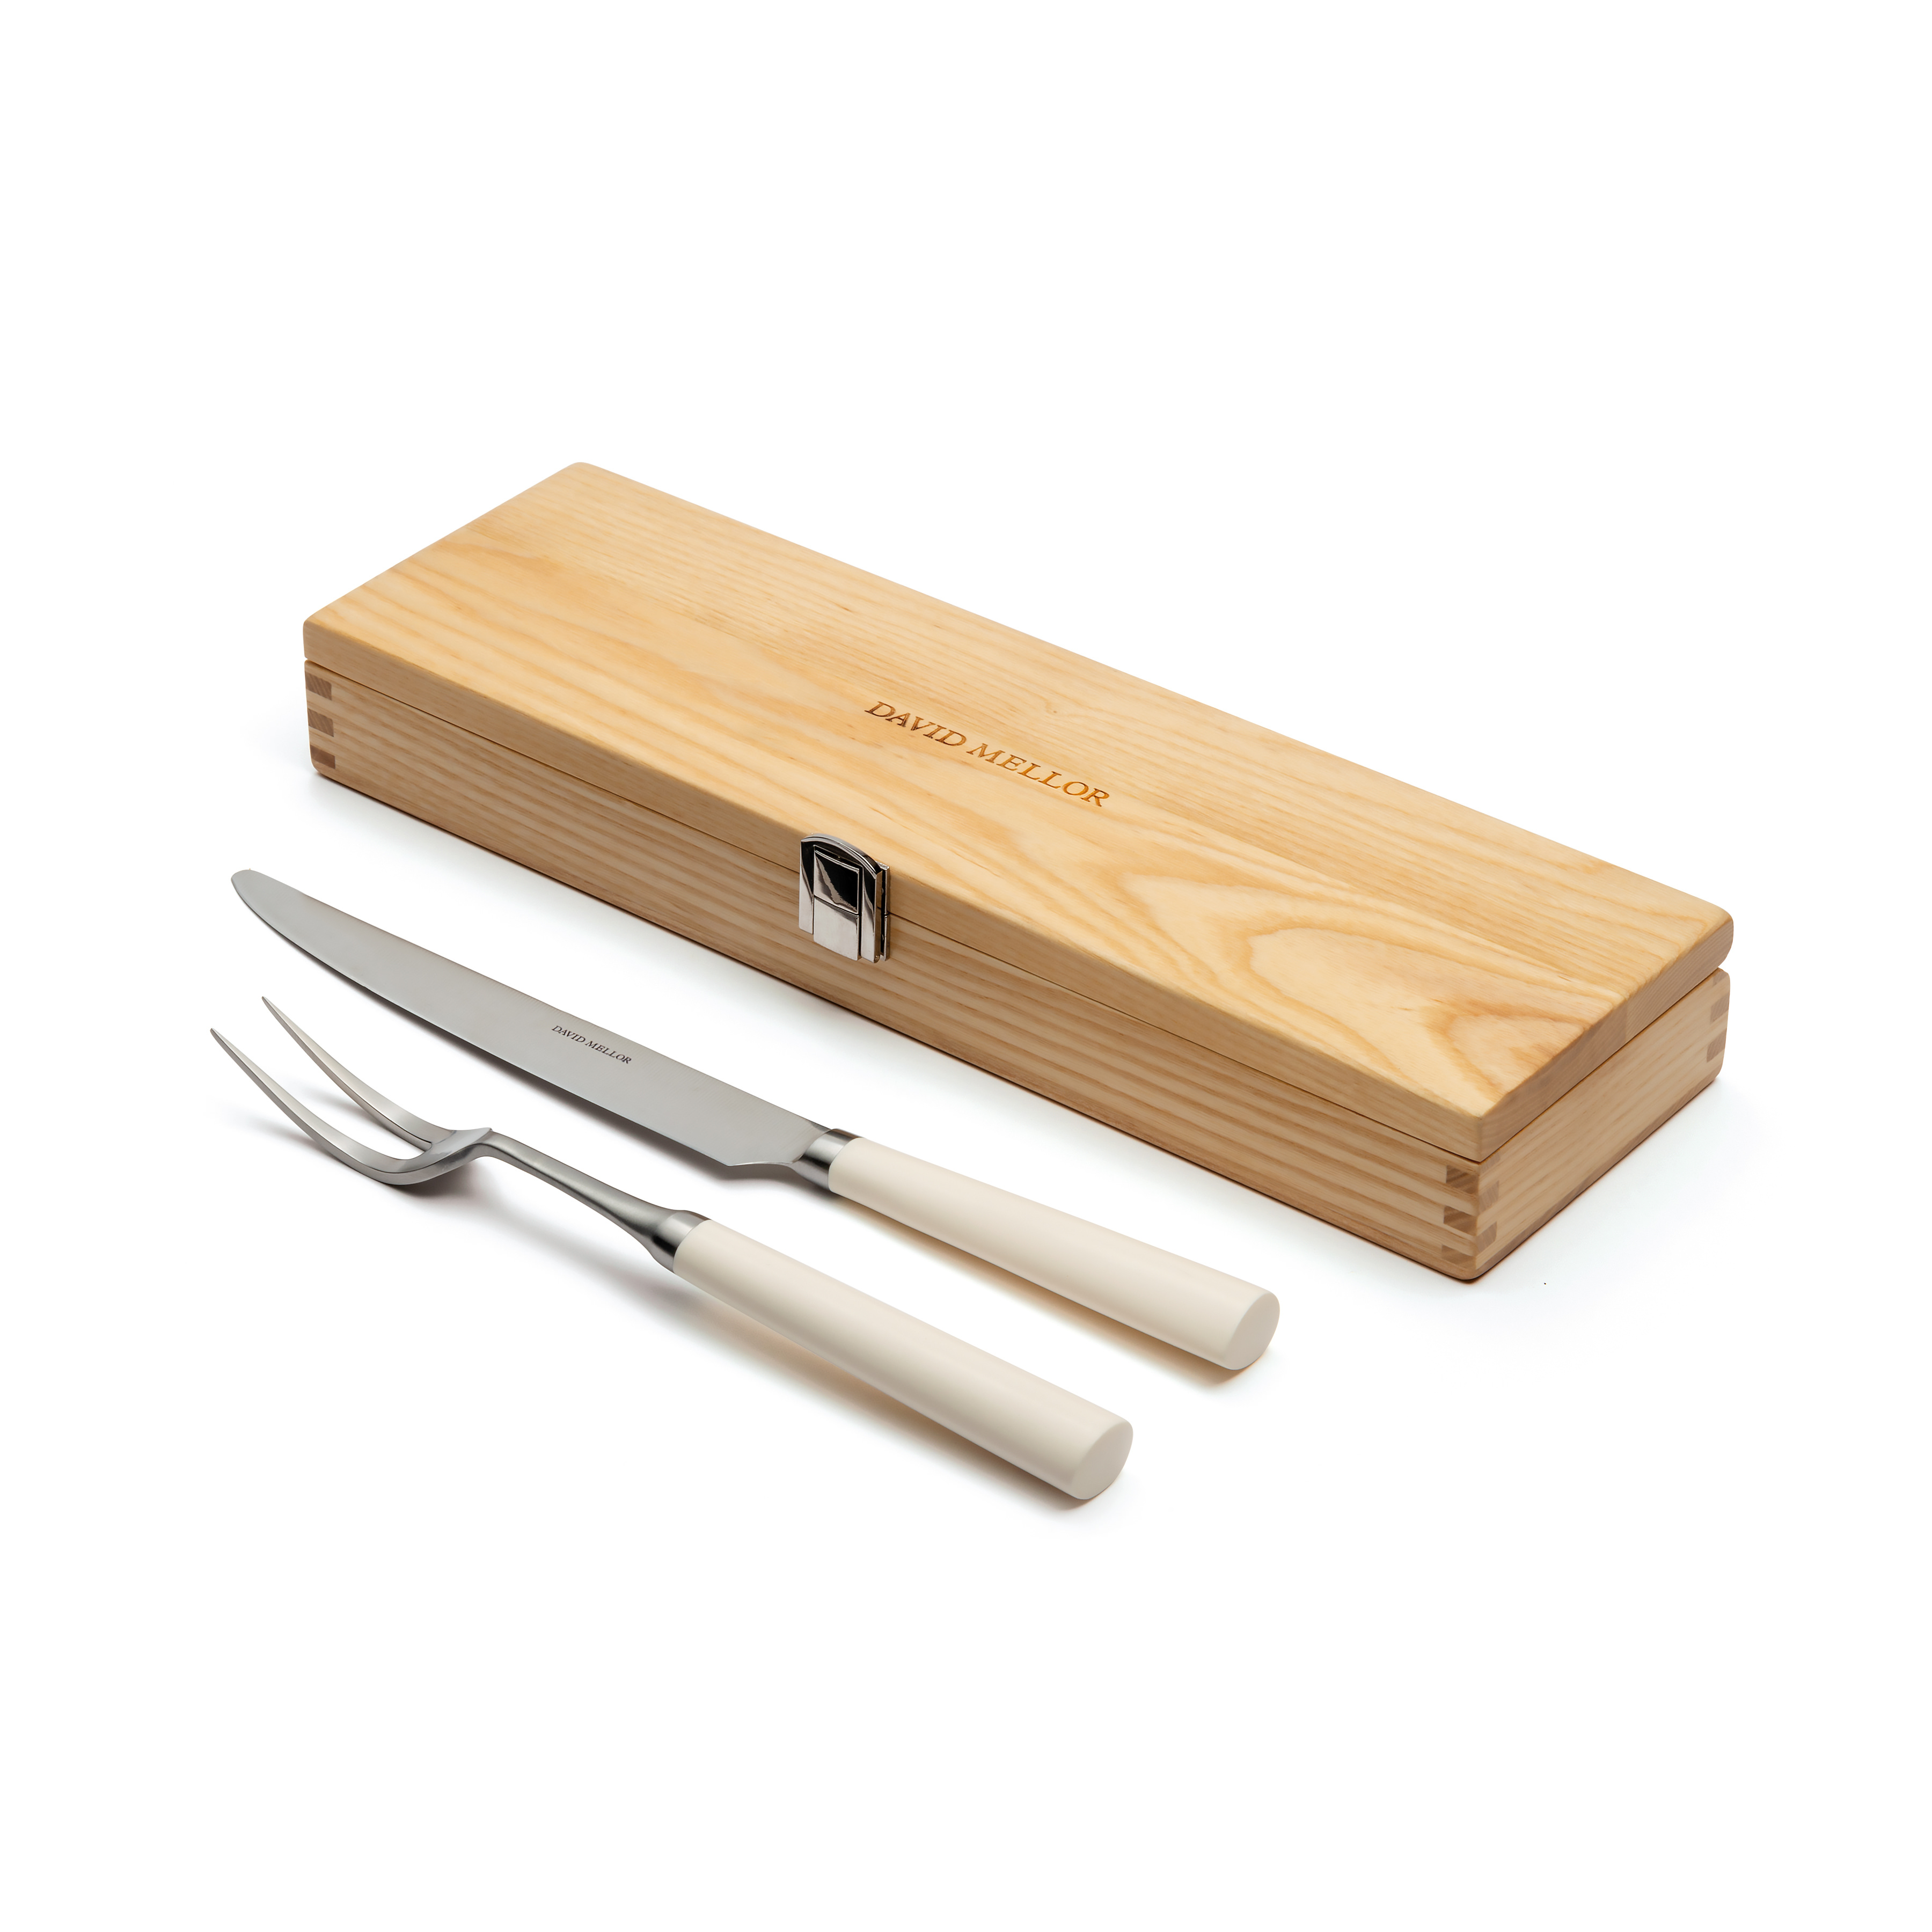 A wooden box and a carving knife and fork